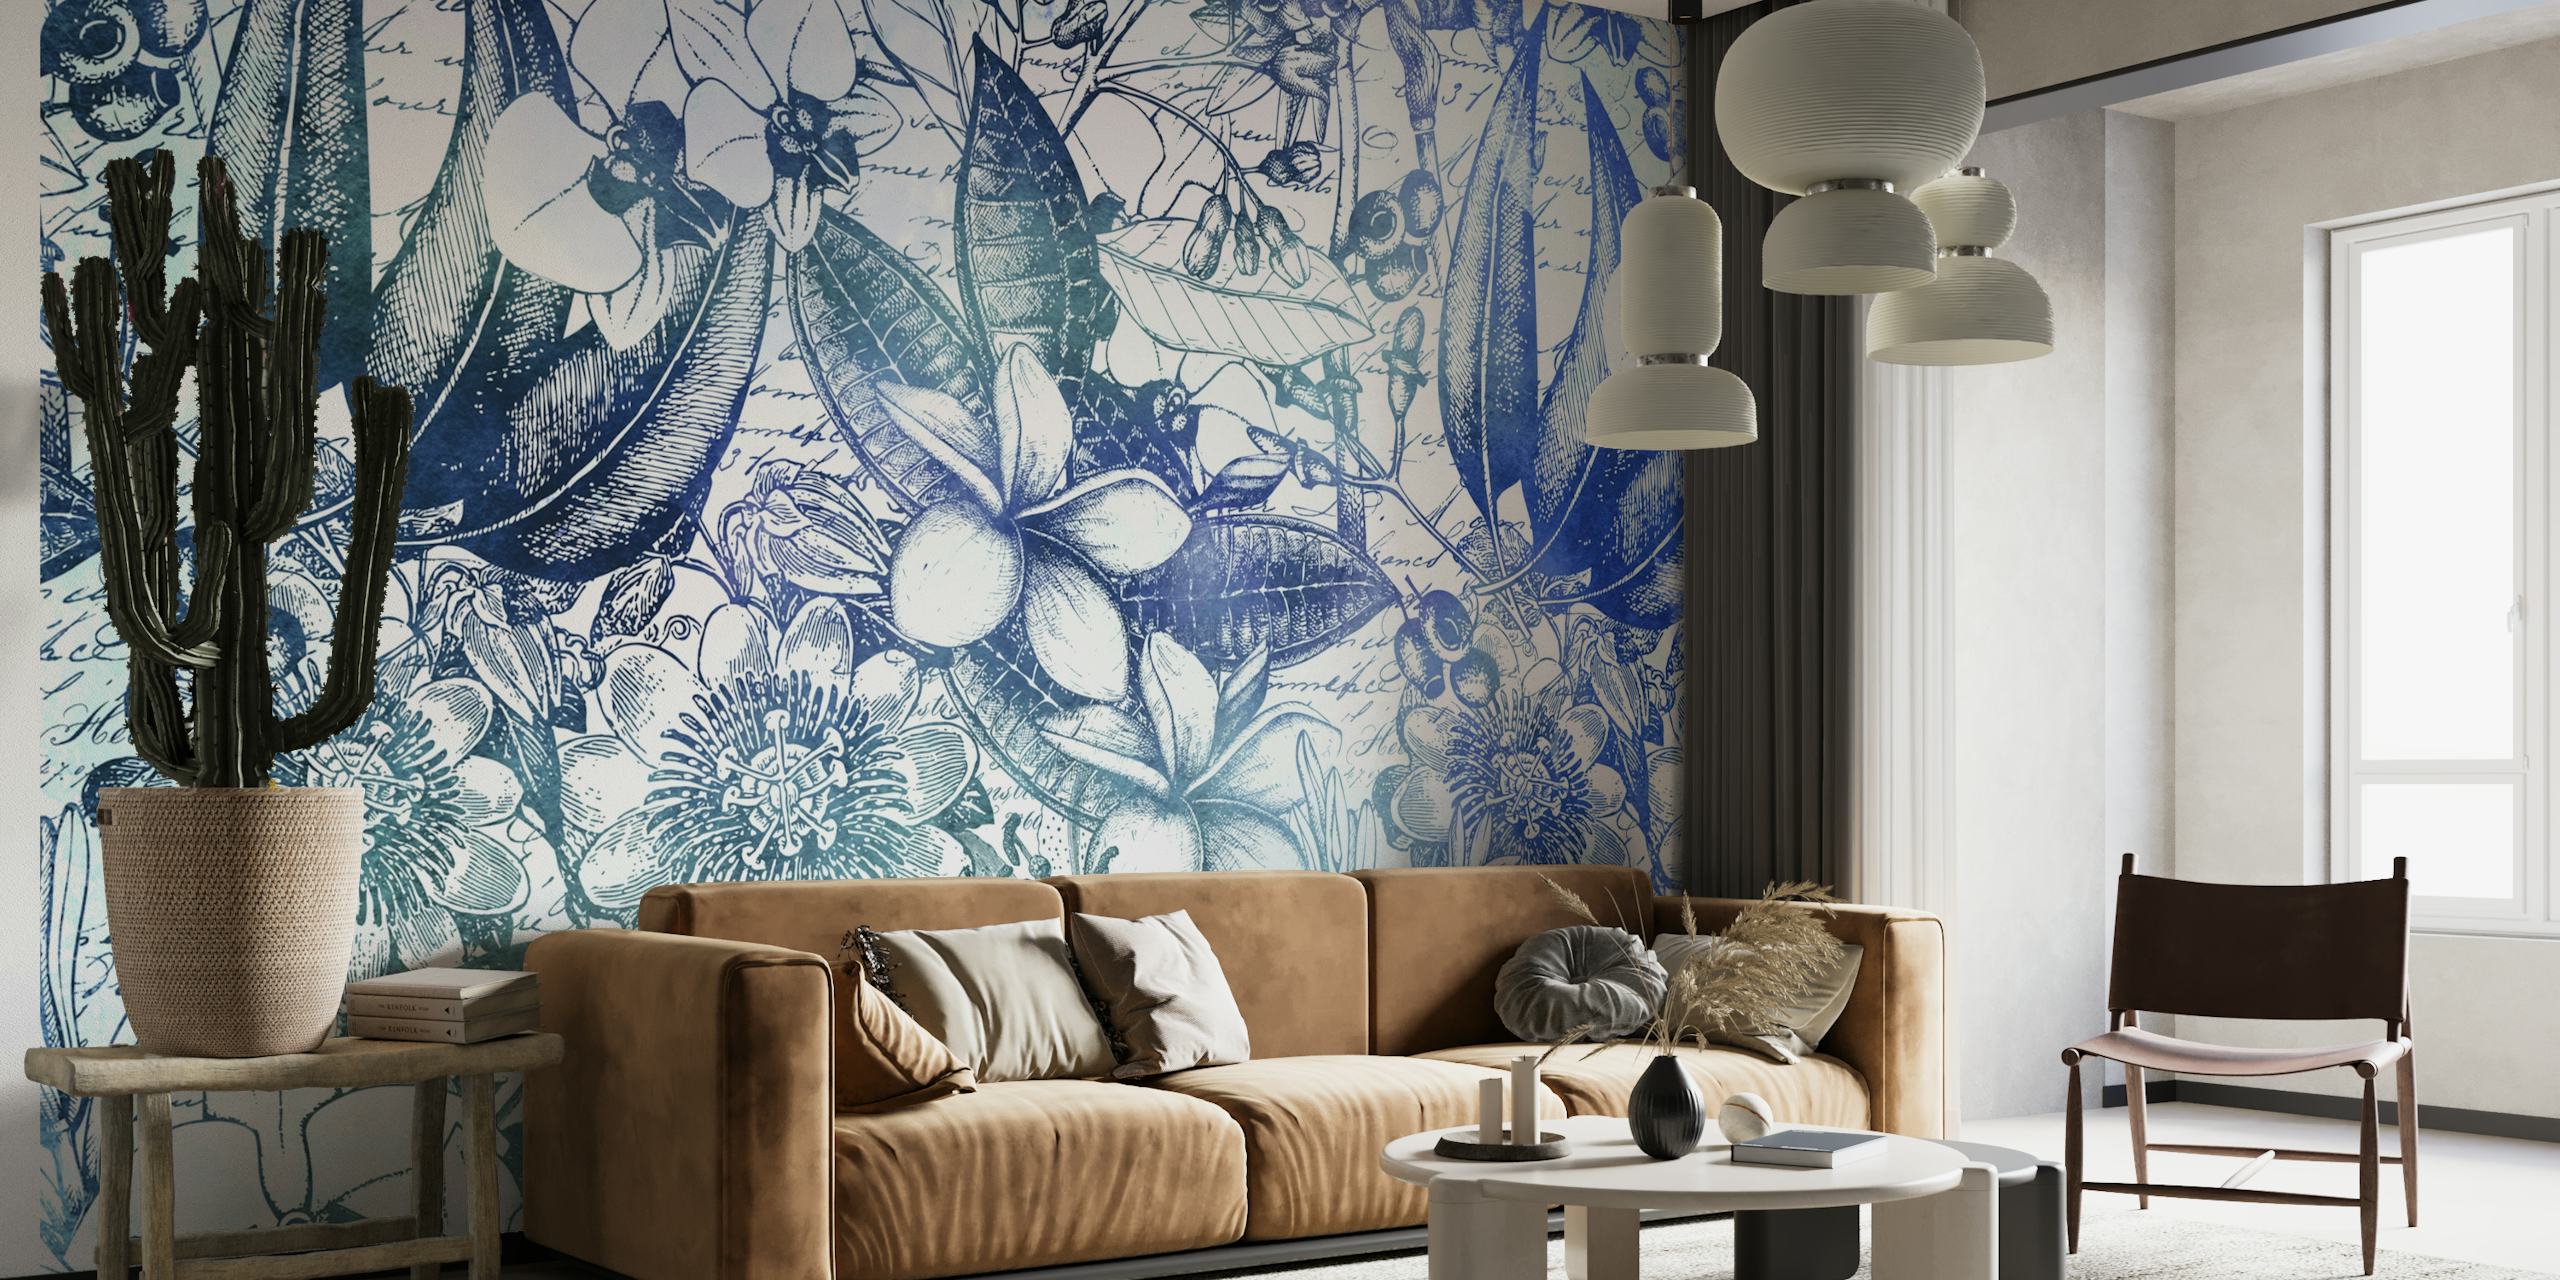 Vintage-style botanical wall mural with blue tones featuring leaves, birds, and florals